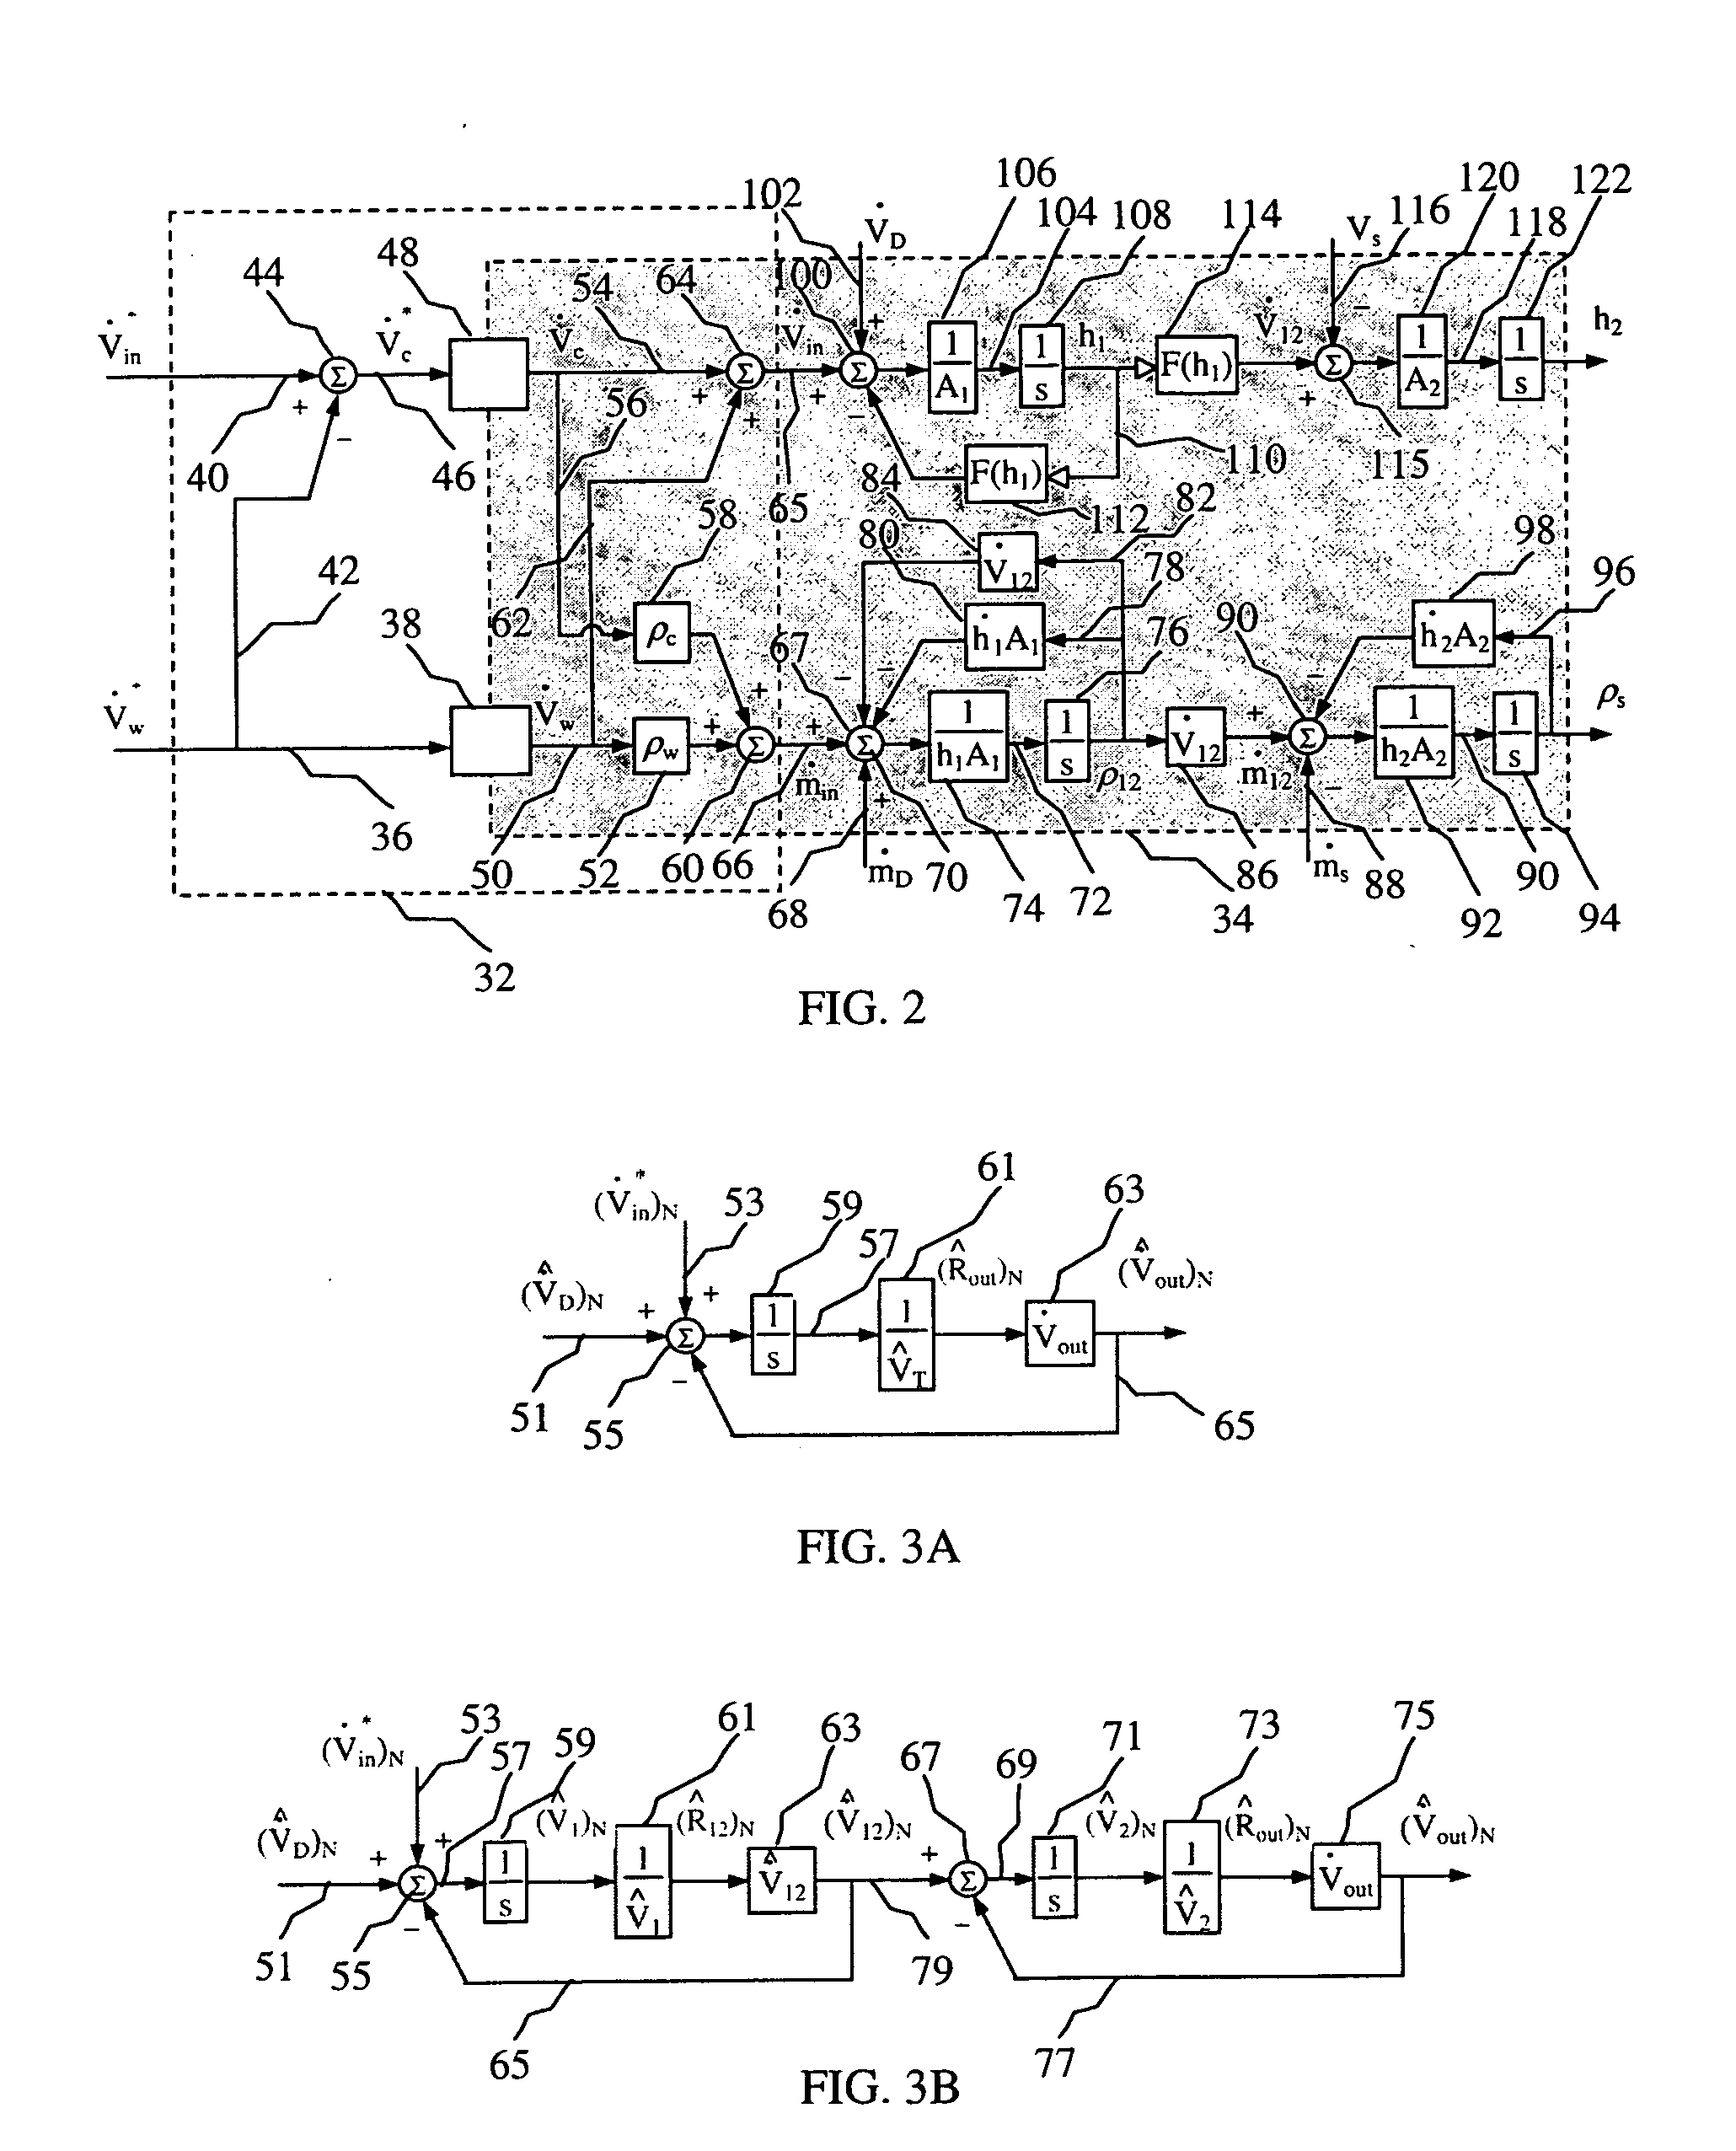 Systems for volumetrically controlling a mixing apparatus